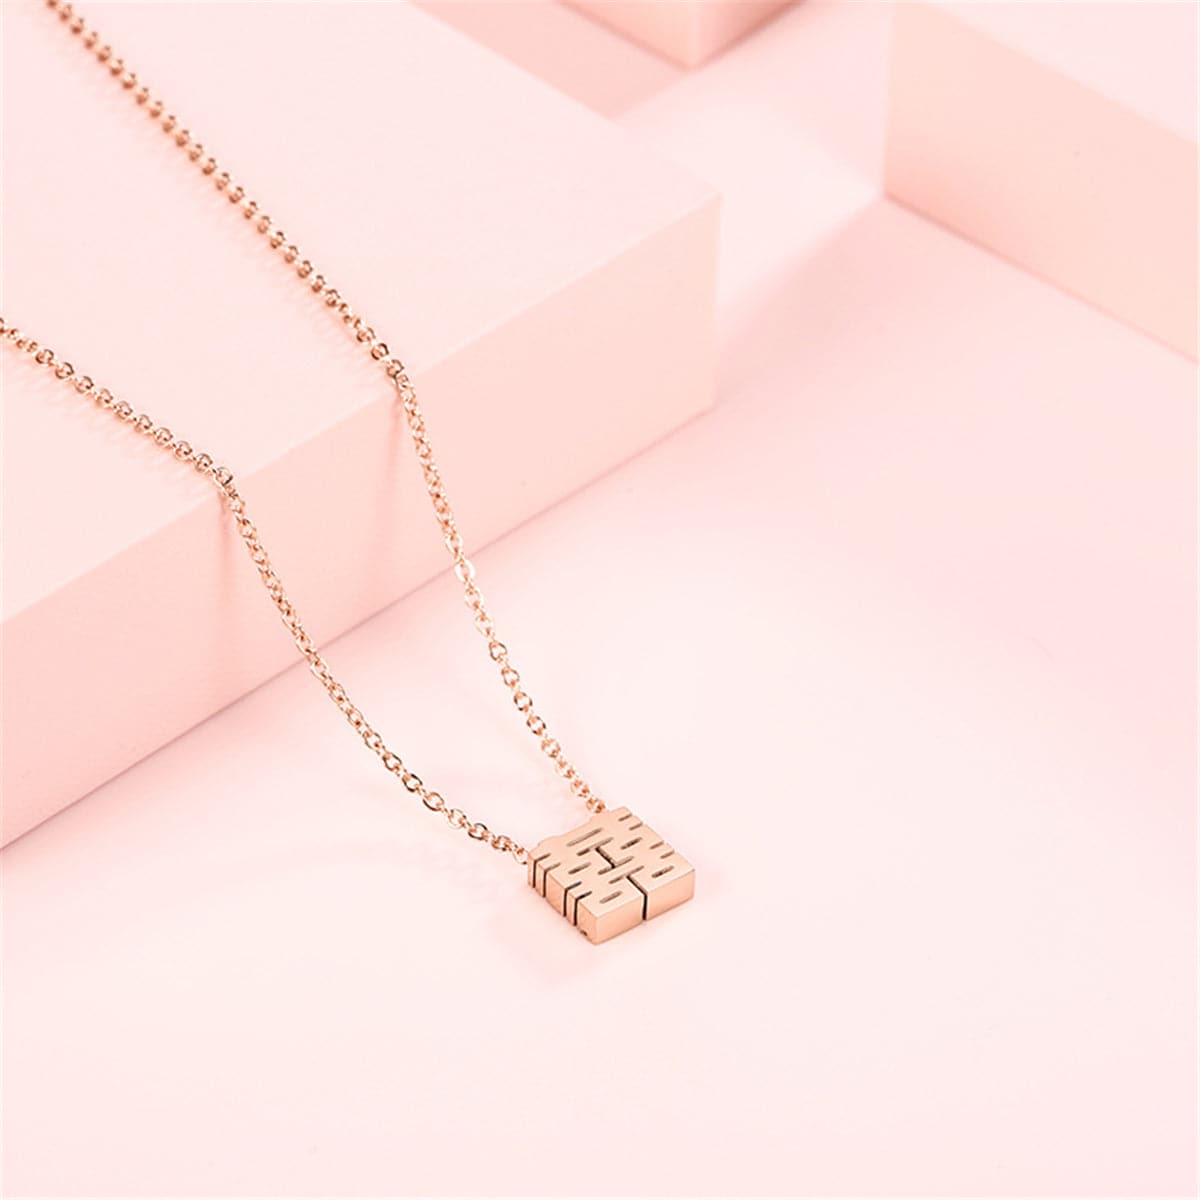 18K Rose Gold-Plated Happiness Symbol Pendant Necklace